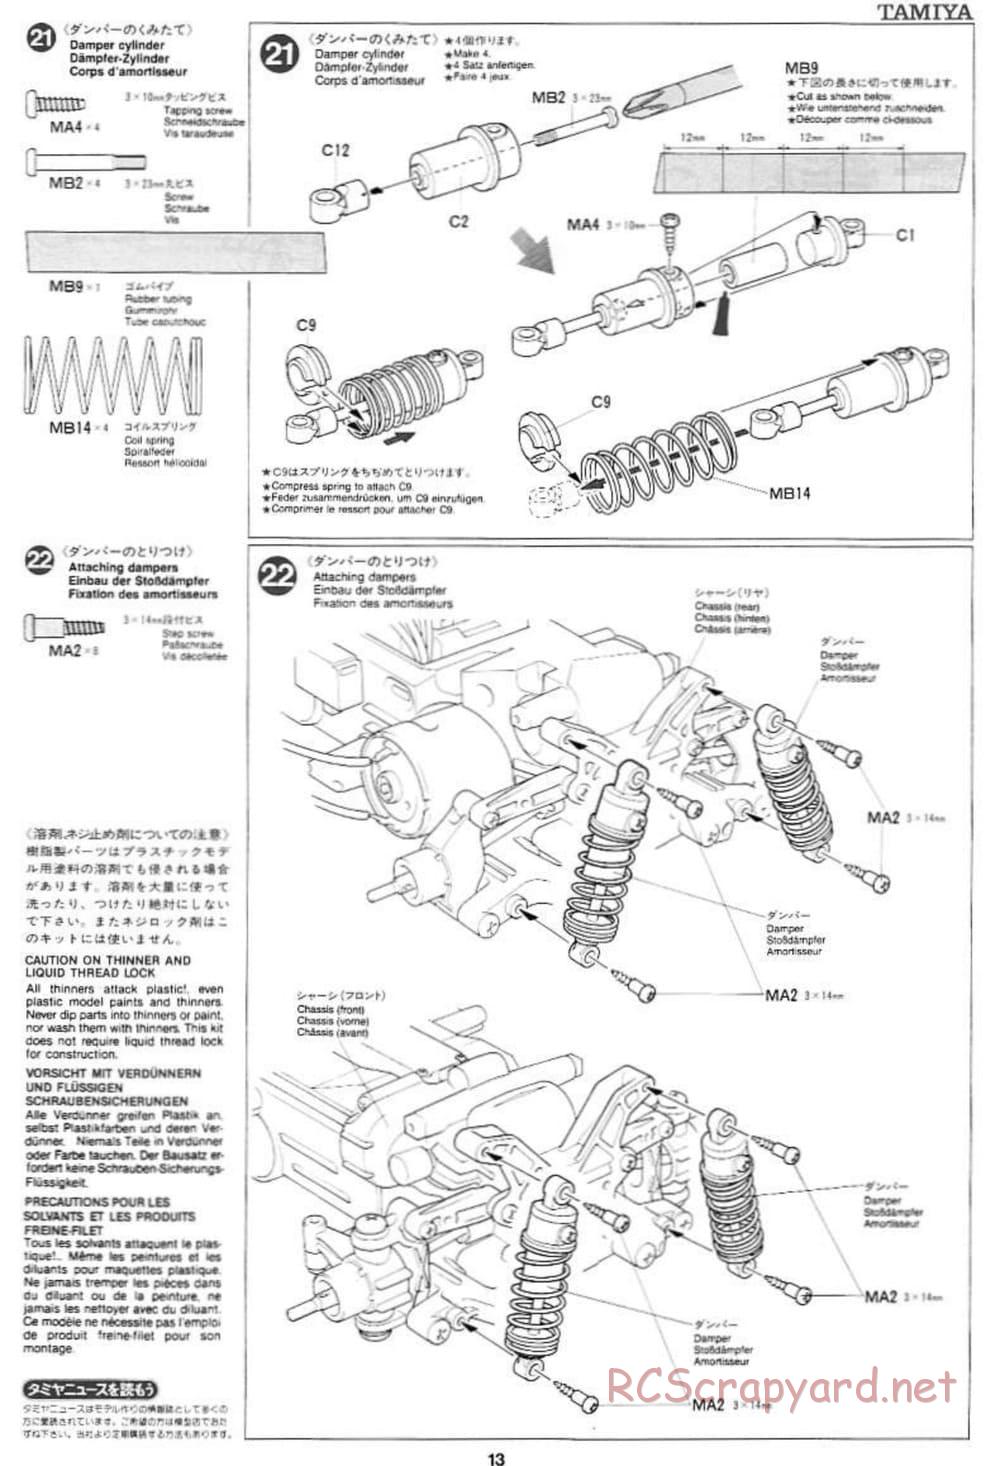 Tamiya - Pennzoil Nismo GT-R - TL-01 Chassis - Manual - Page 13